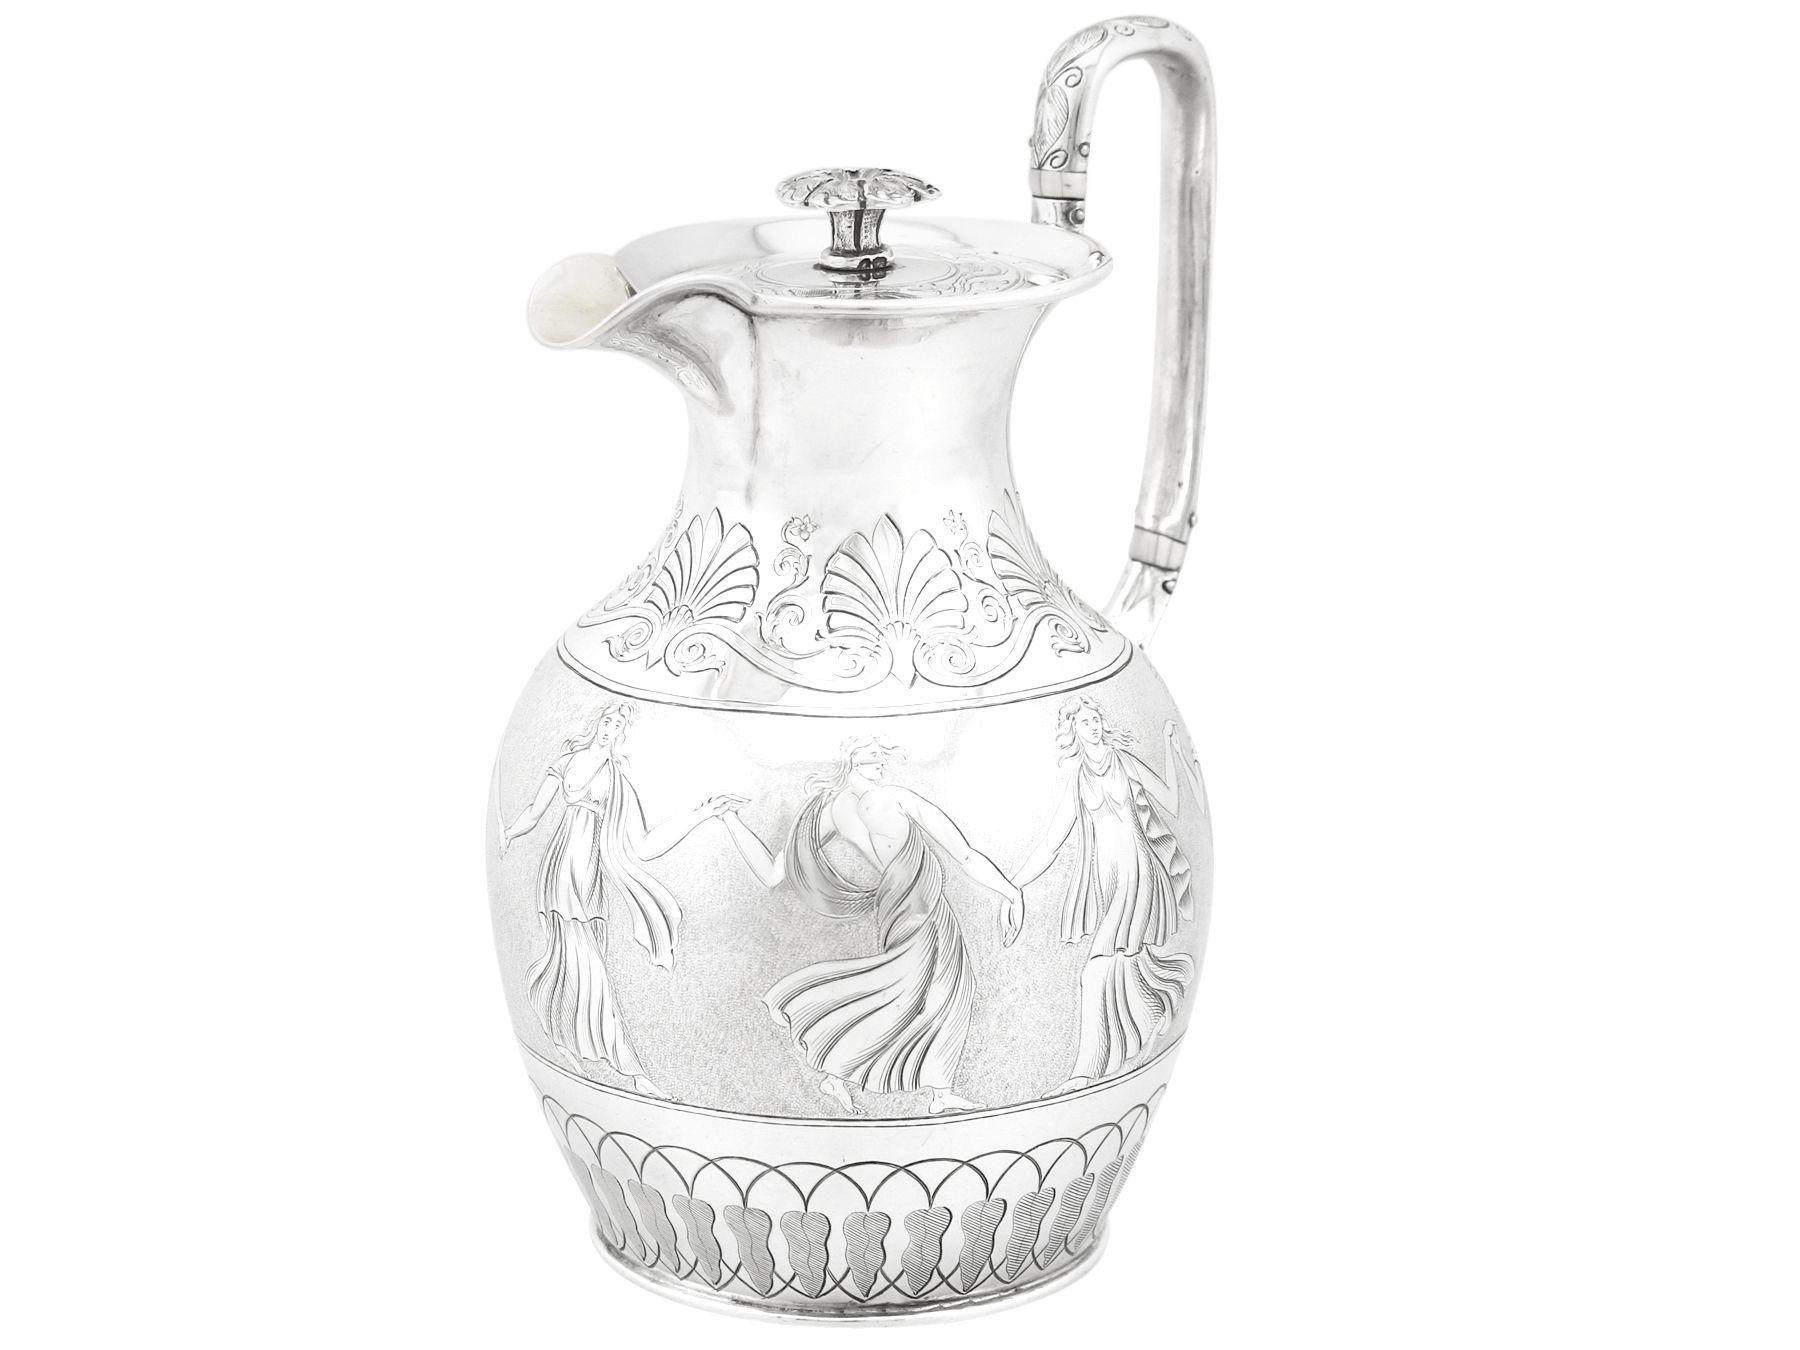 An exceptional, fine and impressive antique Victorian English sterling silver coffee jug made by Joseph Angell I & Joseph Angell II; an addition to our antique silverware collection.

This exceptional antique sterling silver coffee jug, in